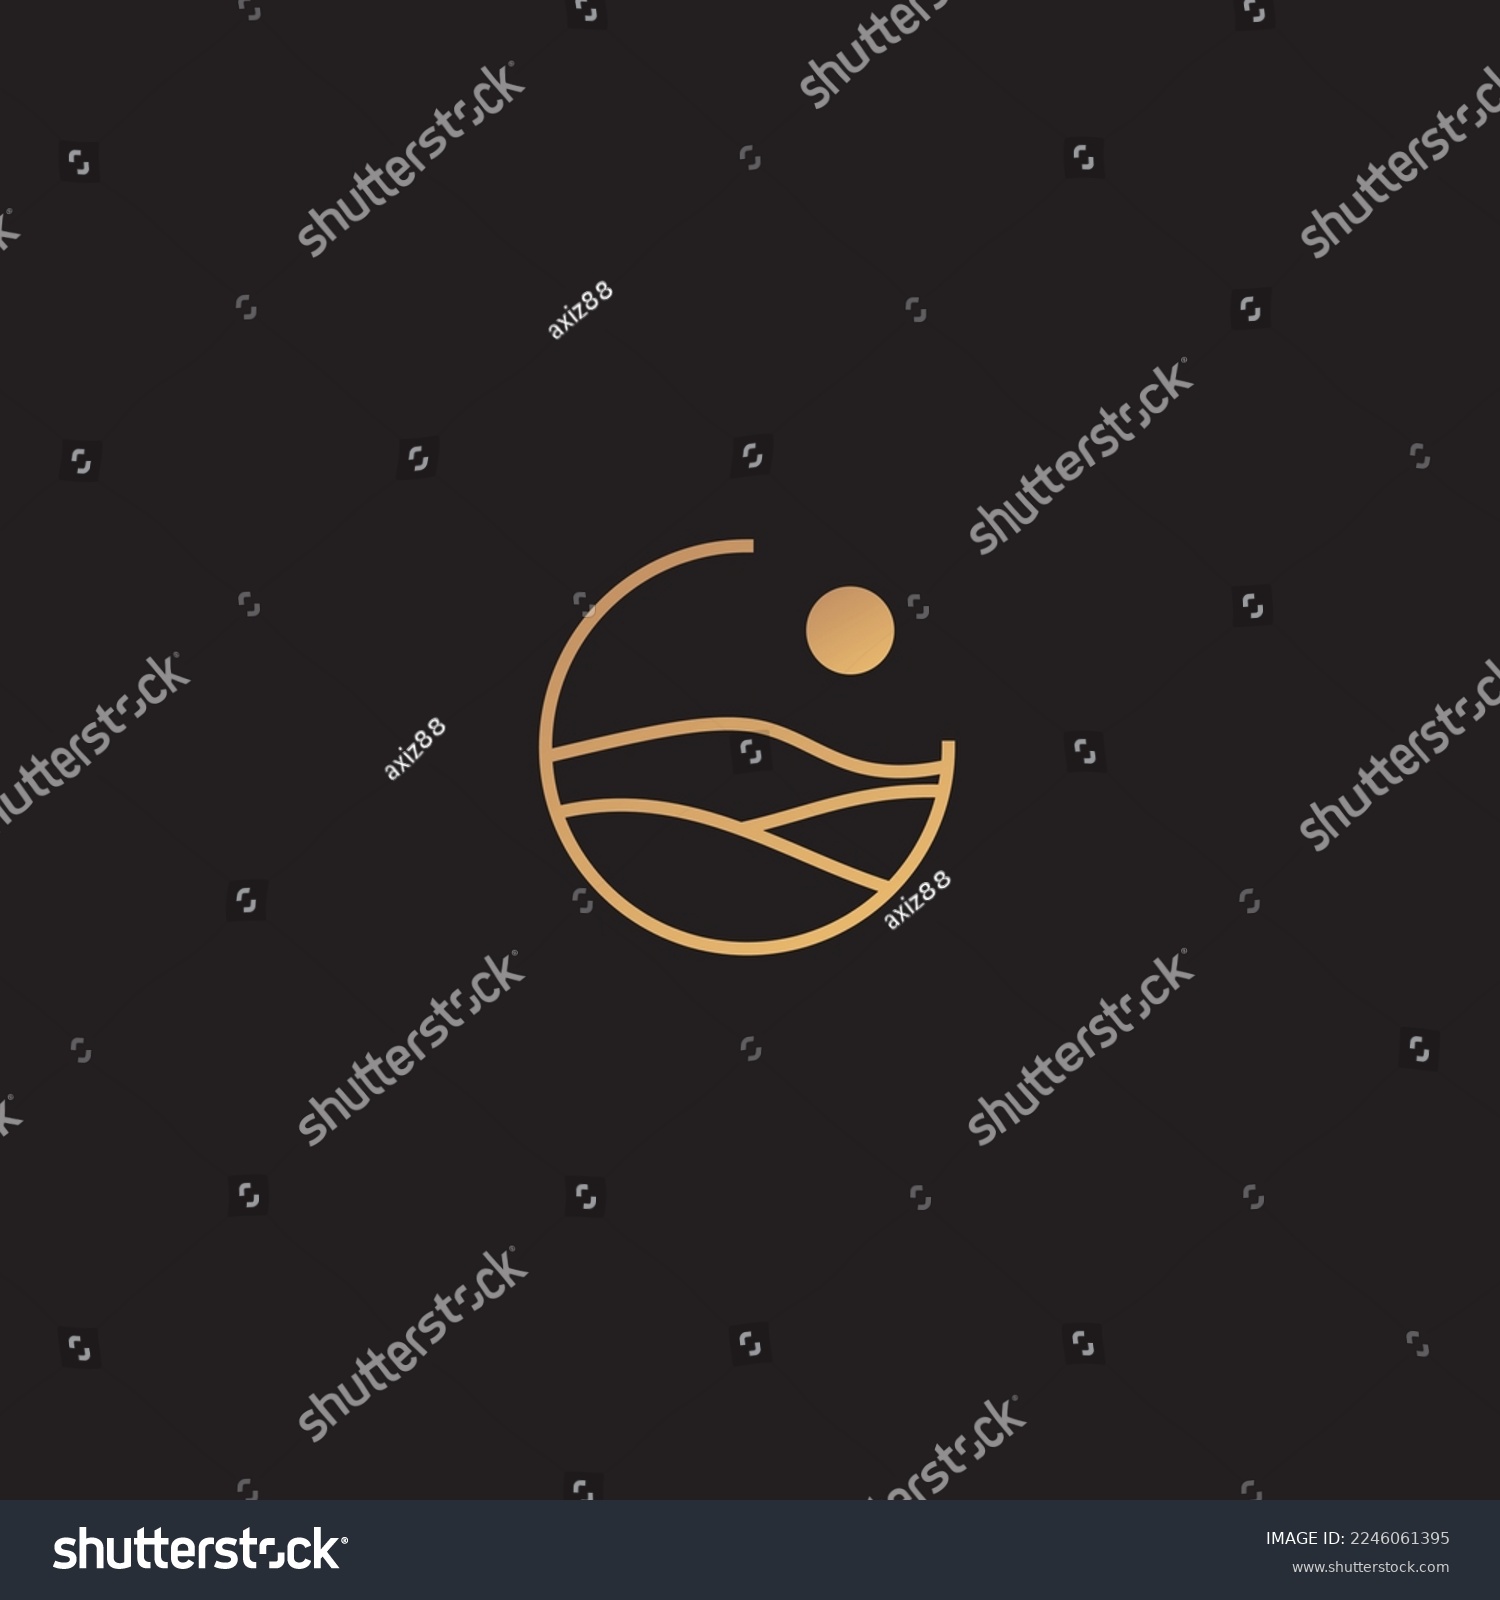 SVG of High sand , desert, logo design. Vector illustration of abstract wave with moon view.logo design vector line icon template svg